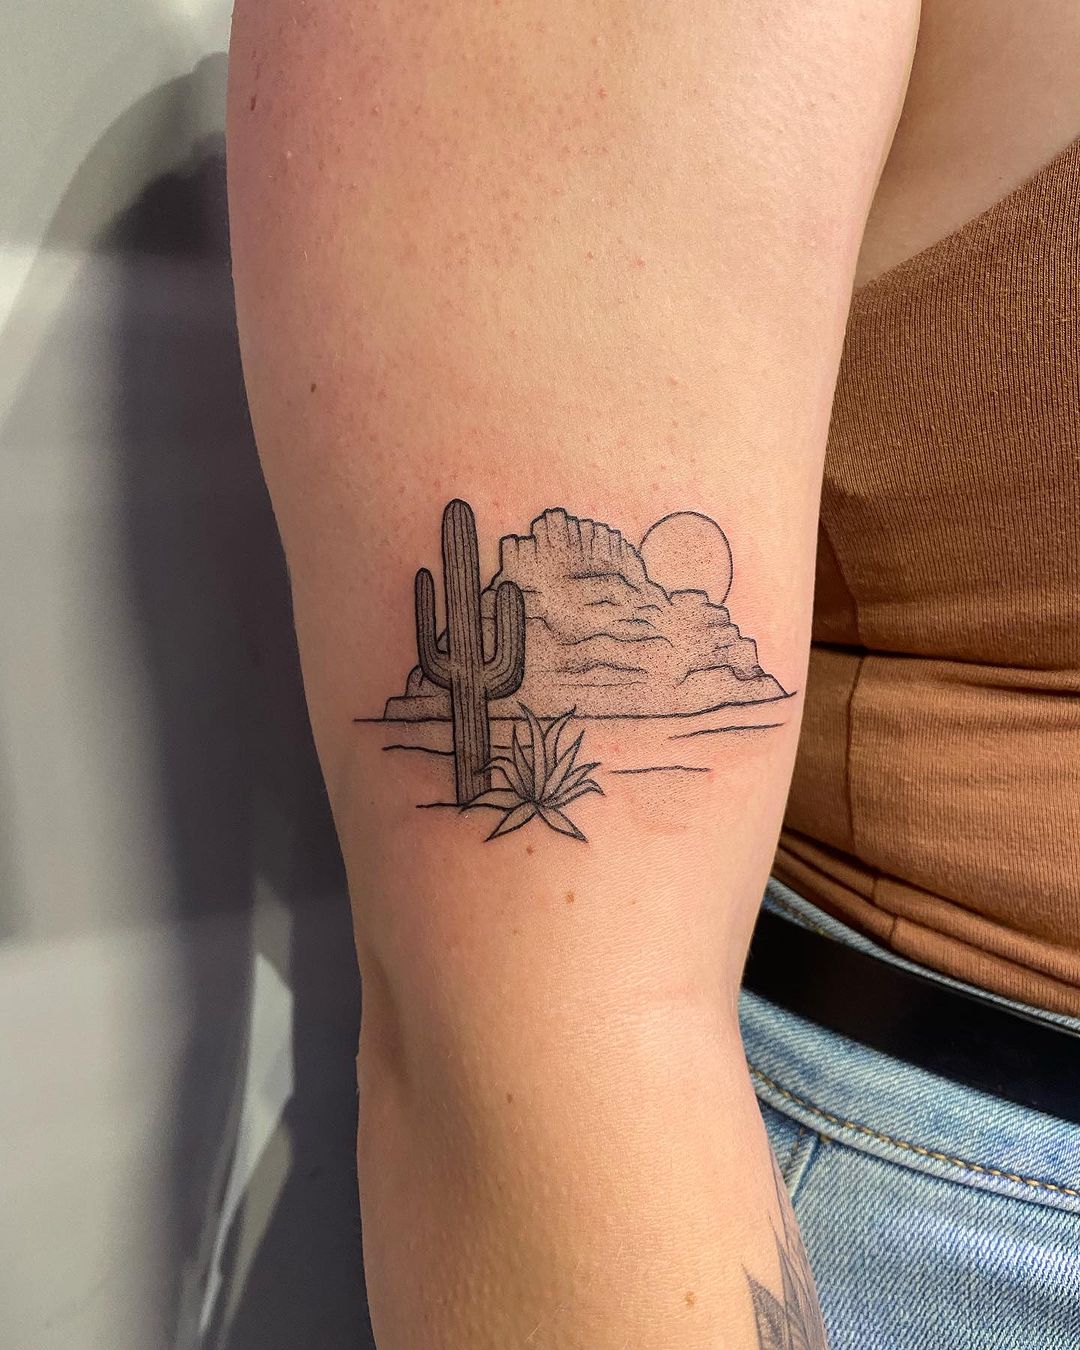 Tattoo tagged with: cactus, dots, heart, mountain, landscape | inked-app.com